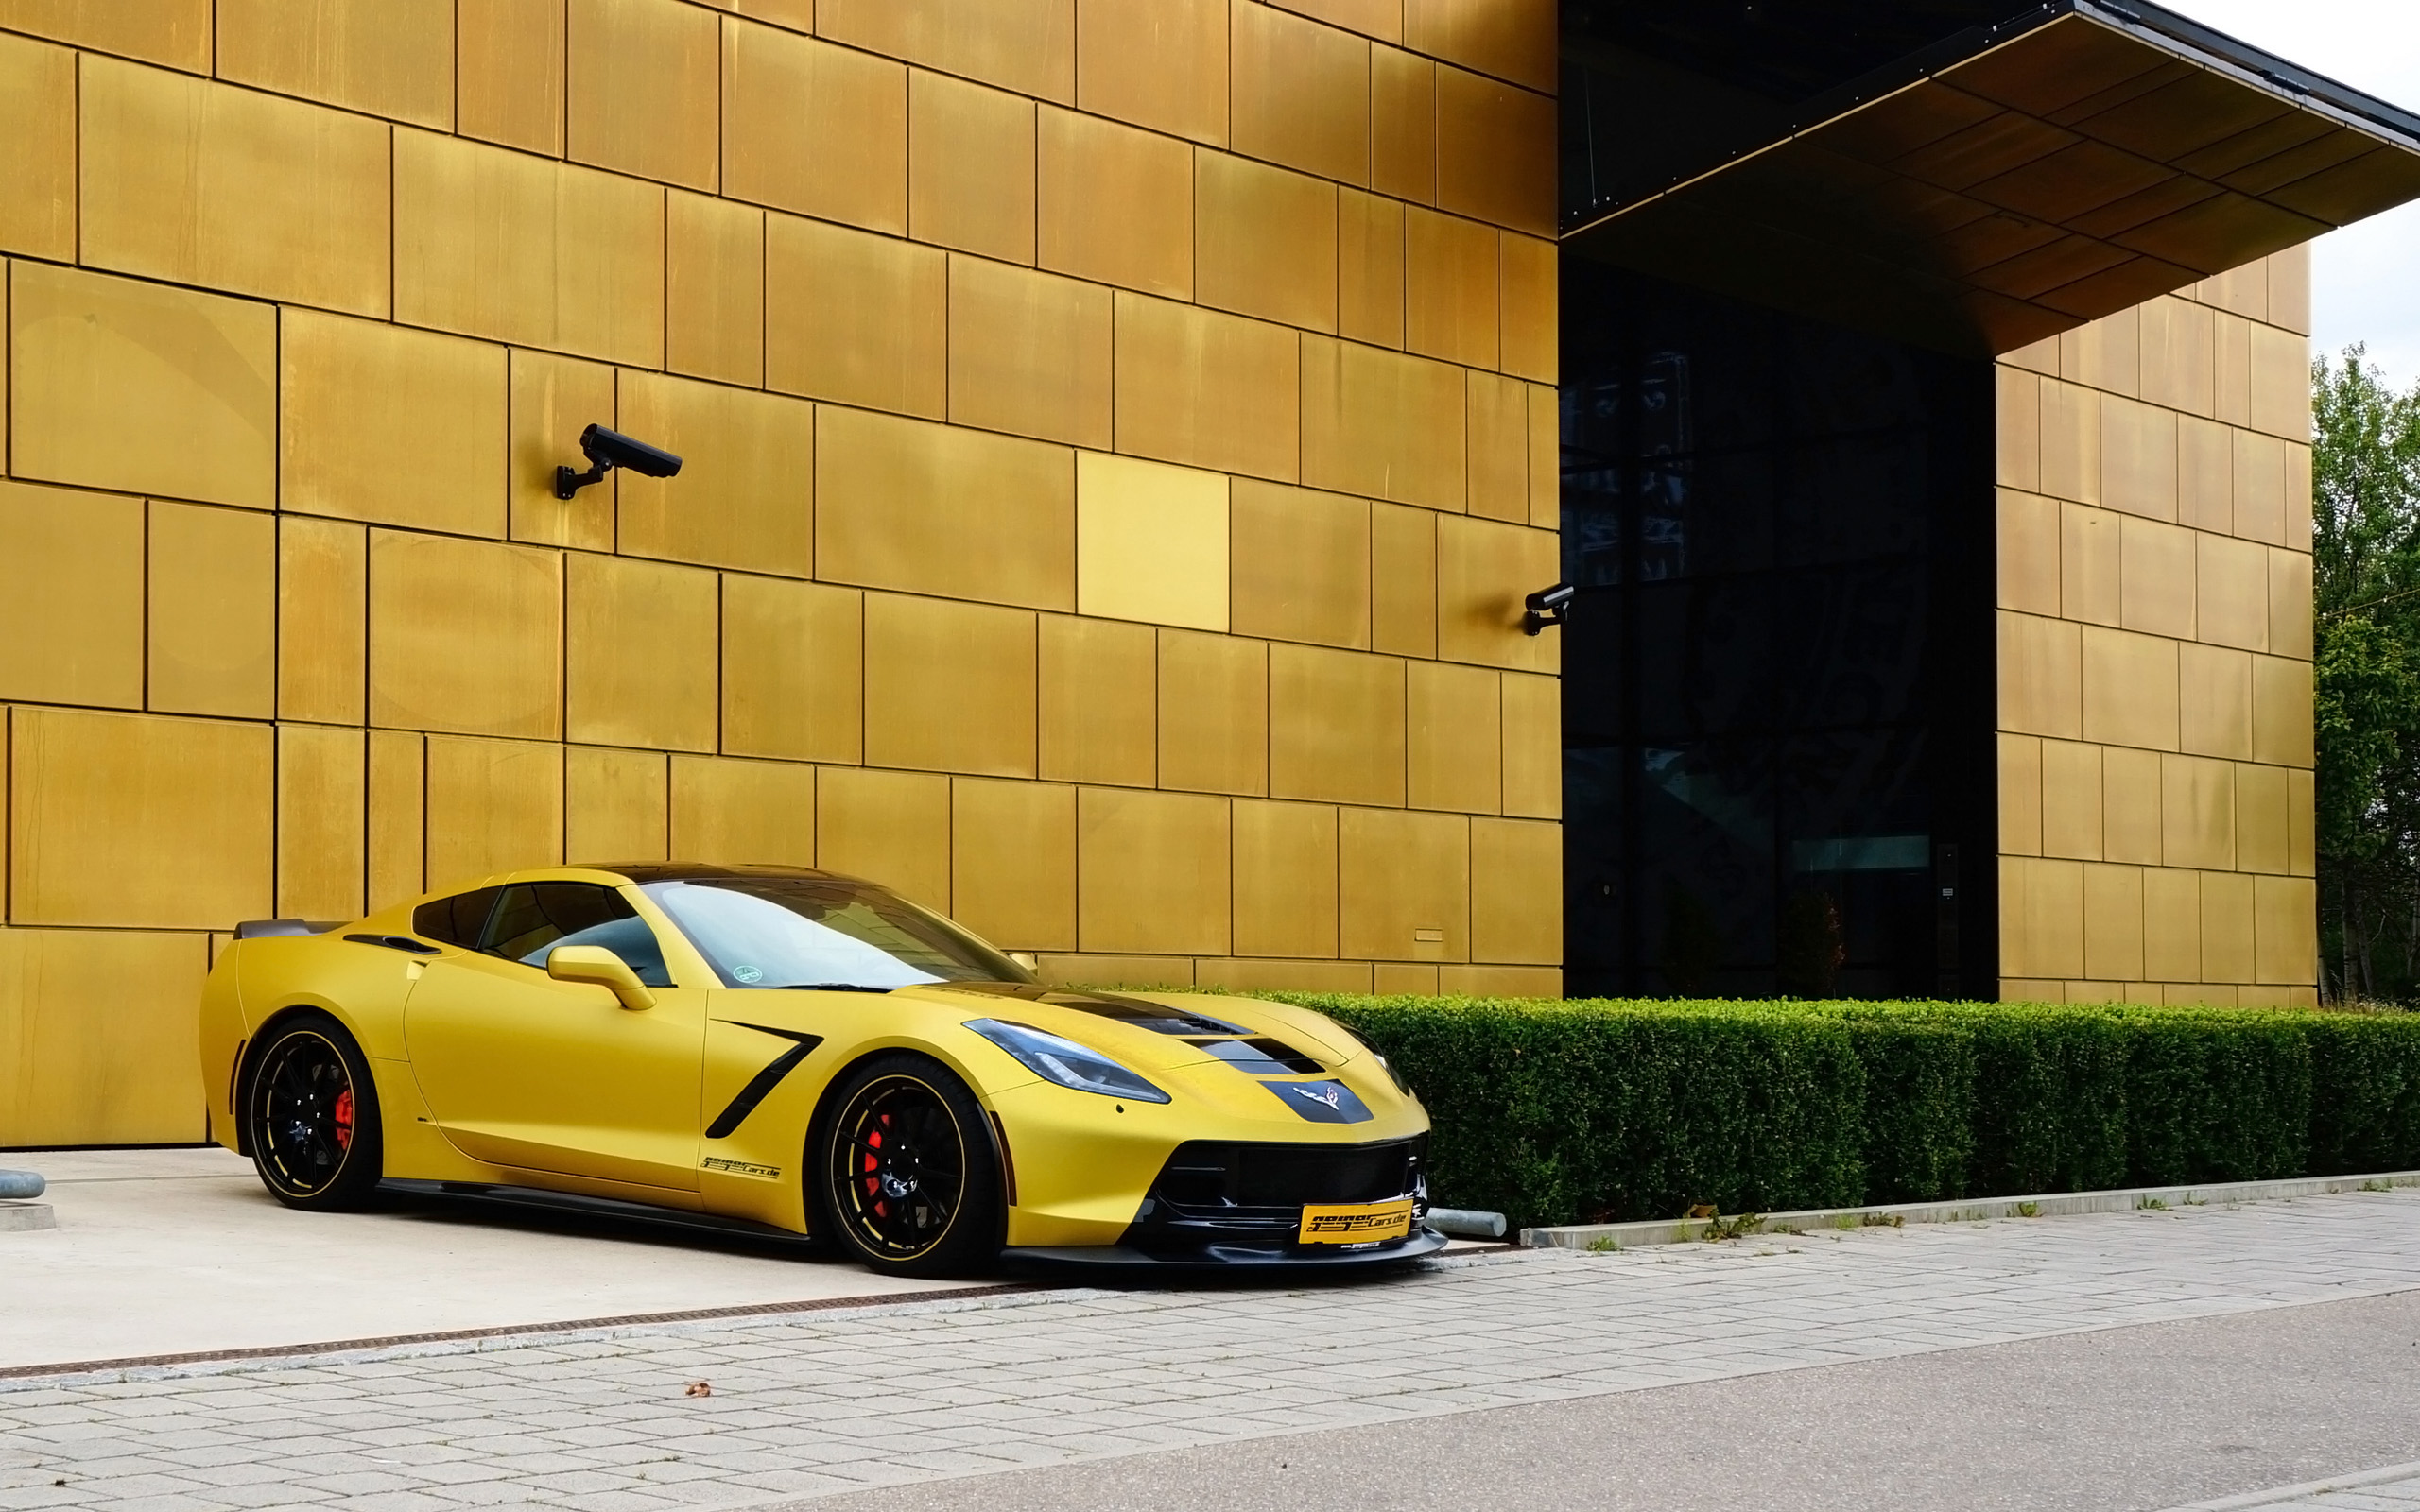 The C7 Z06 Is Marketed As A Supercar But This Custom Stingray From